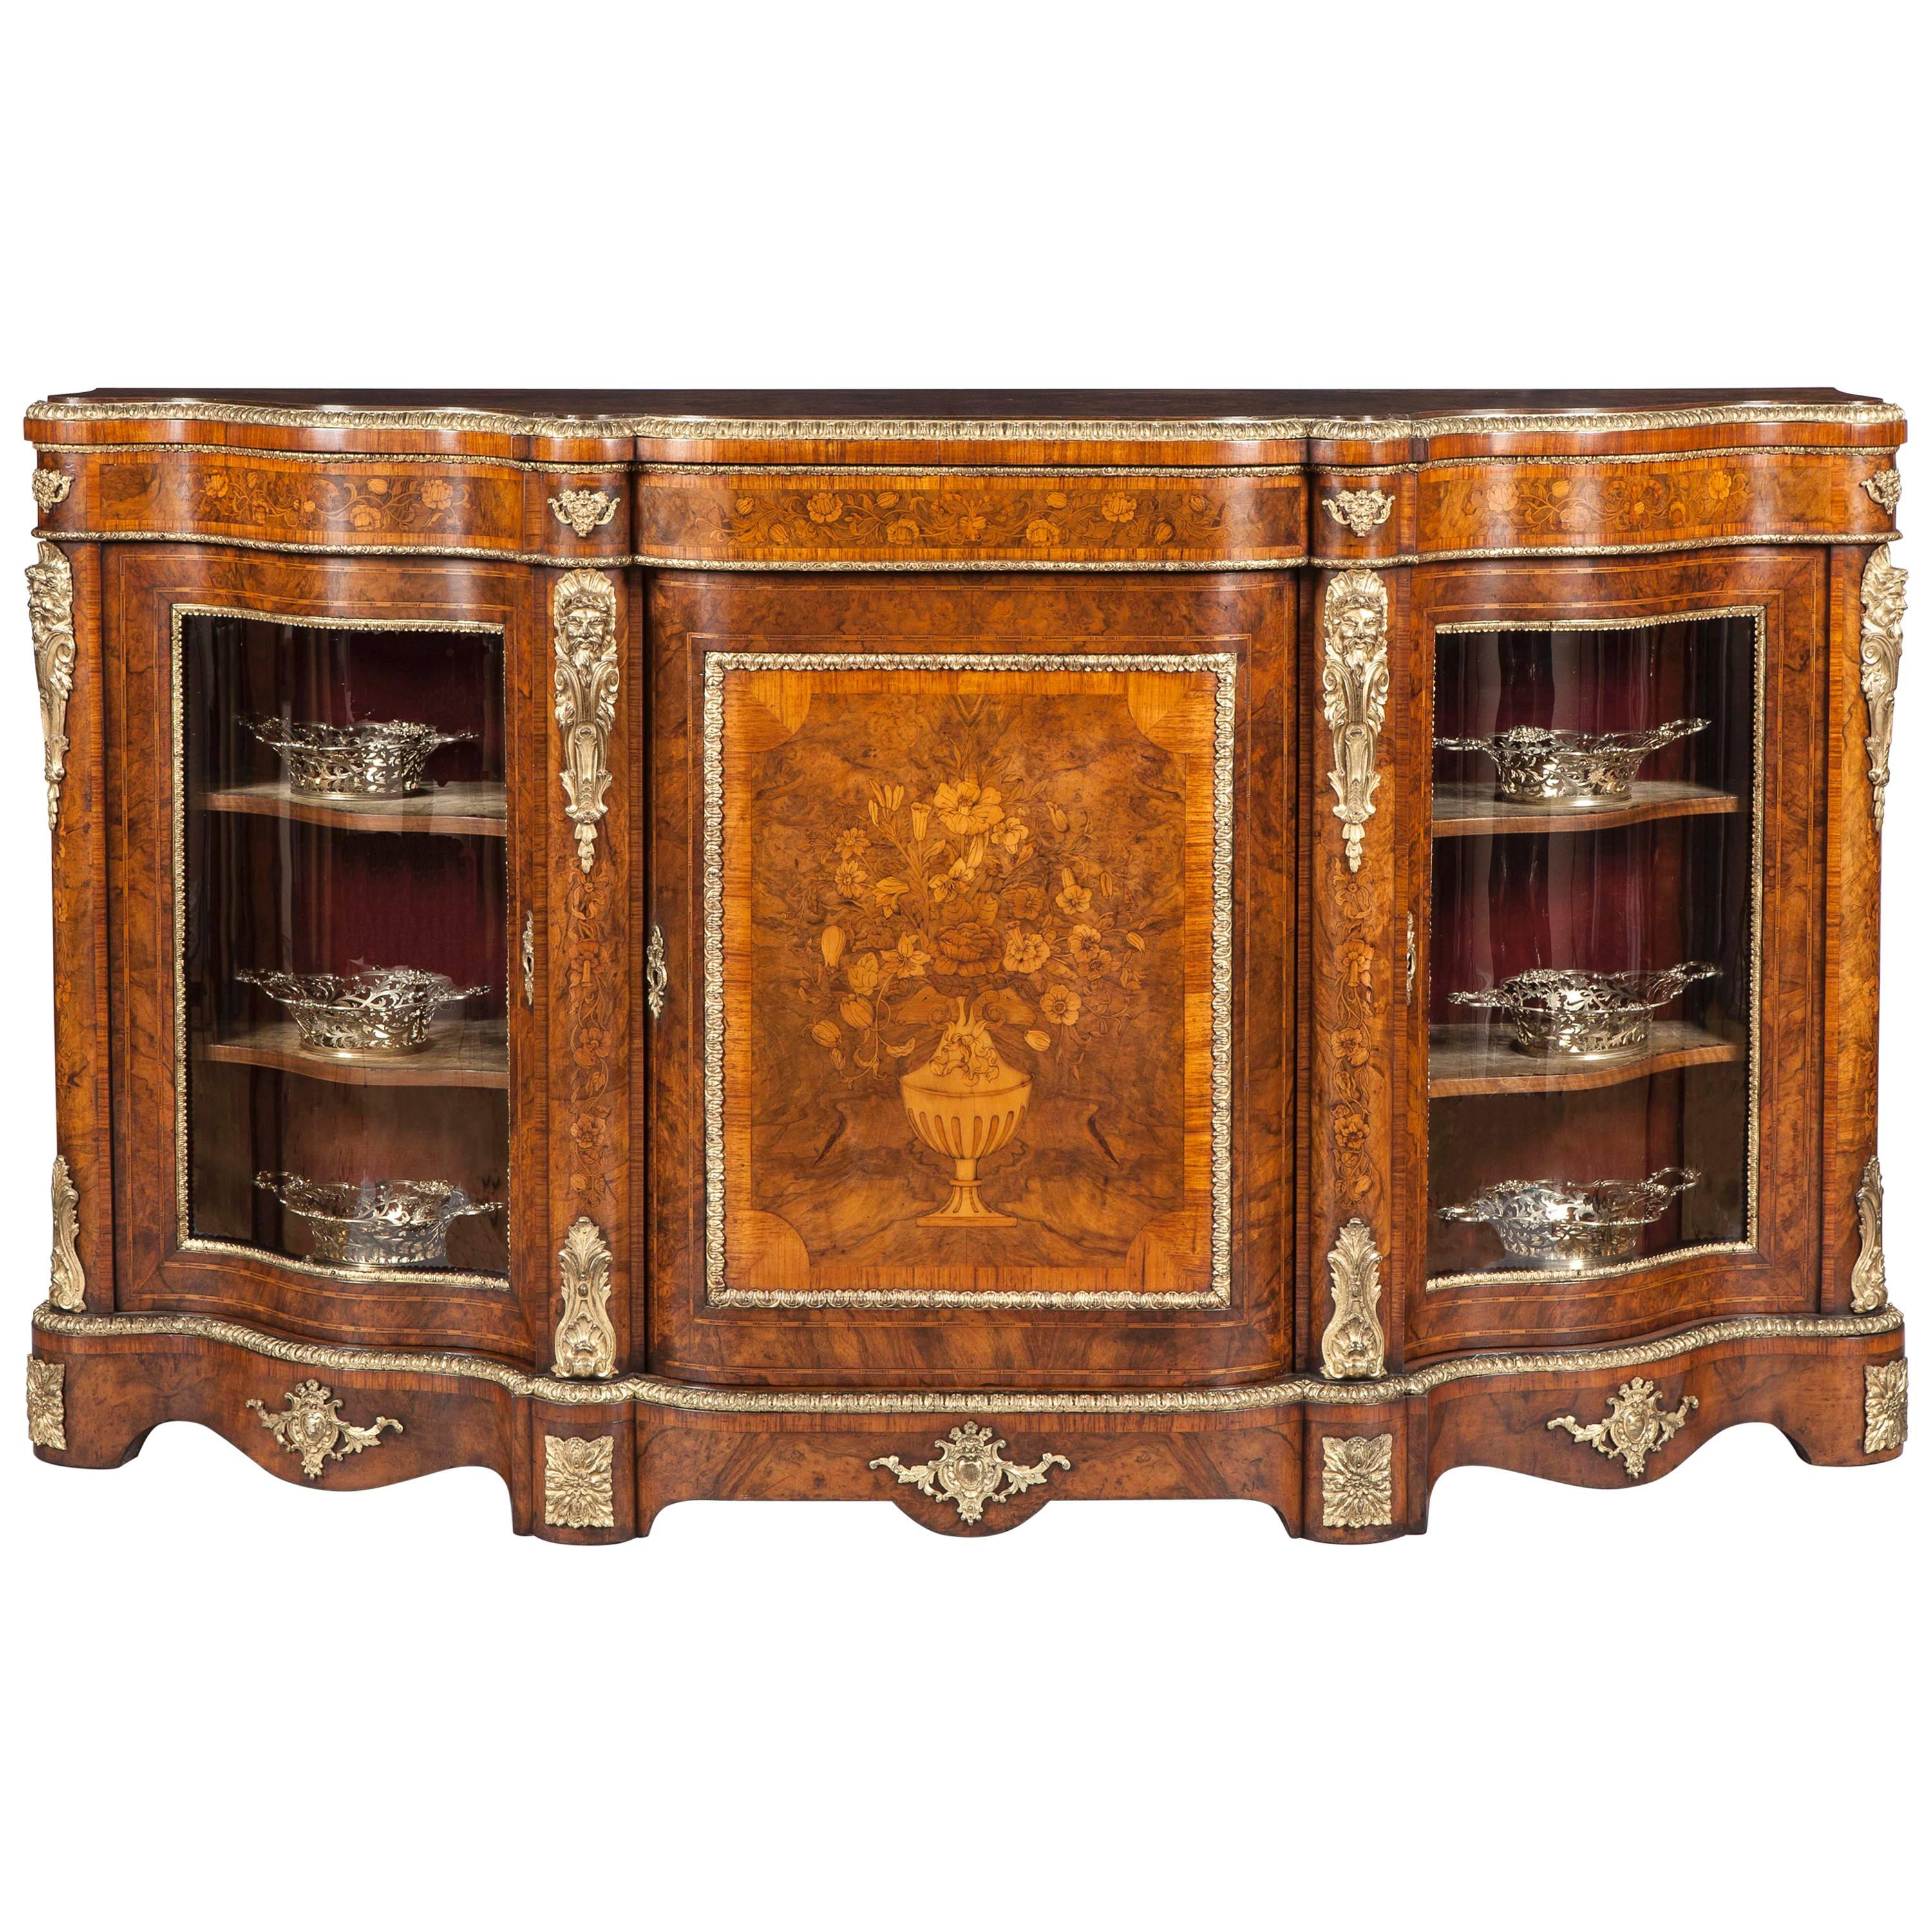 19th Century English Walnut Inlaid Floral Marquetry and Bronze Mounted Credenza